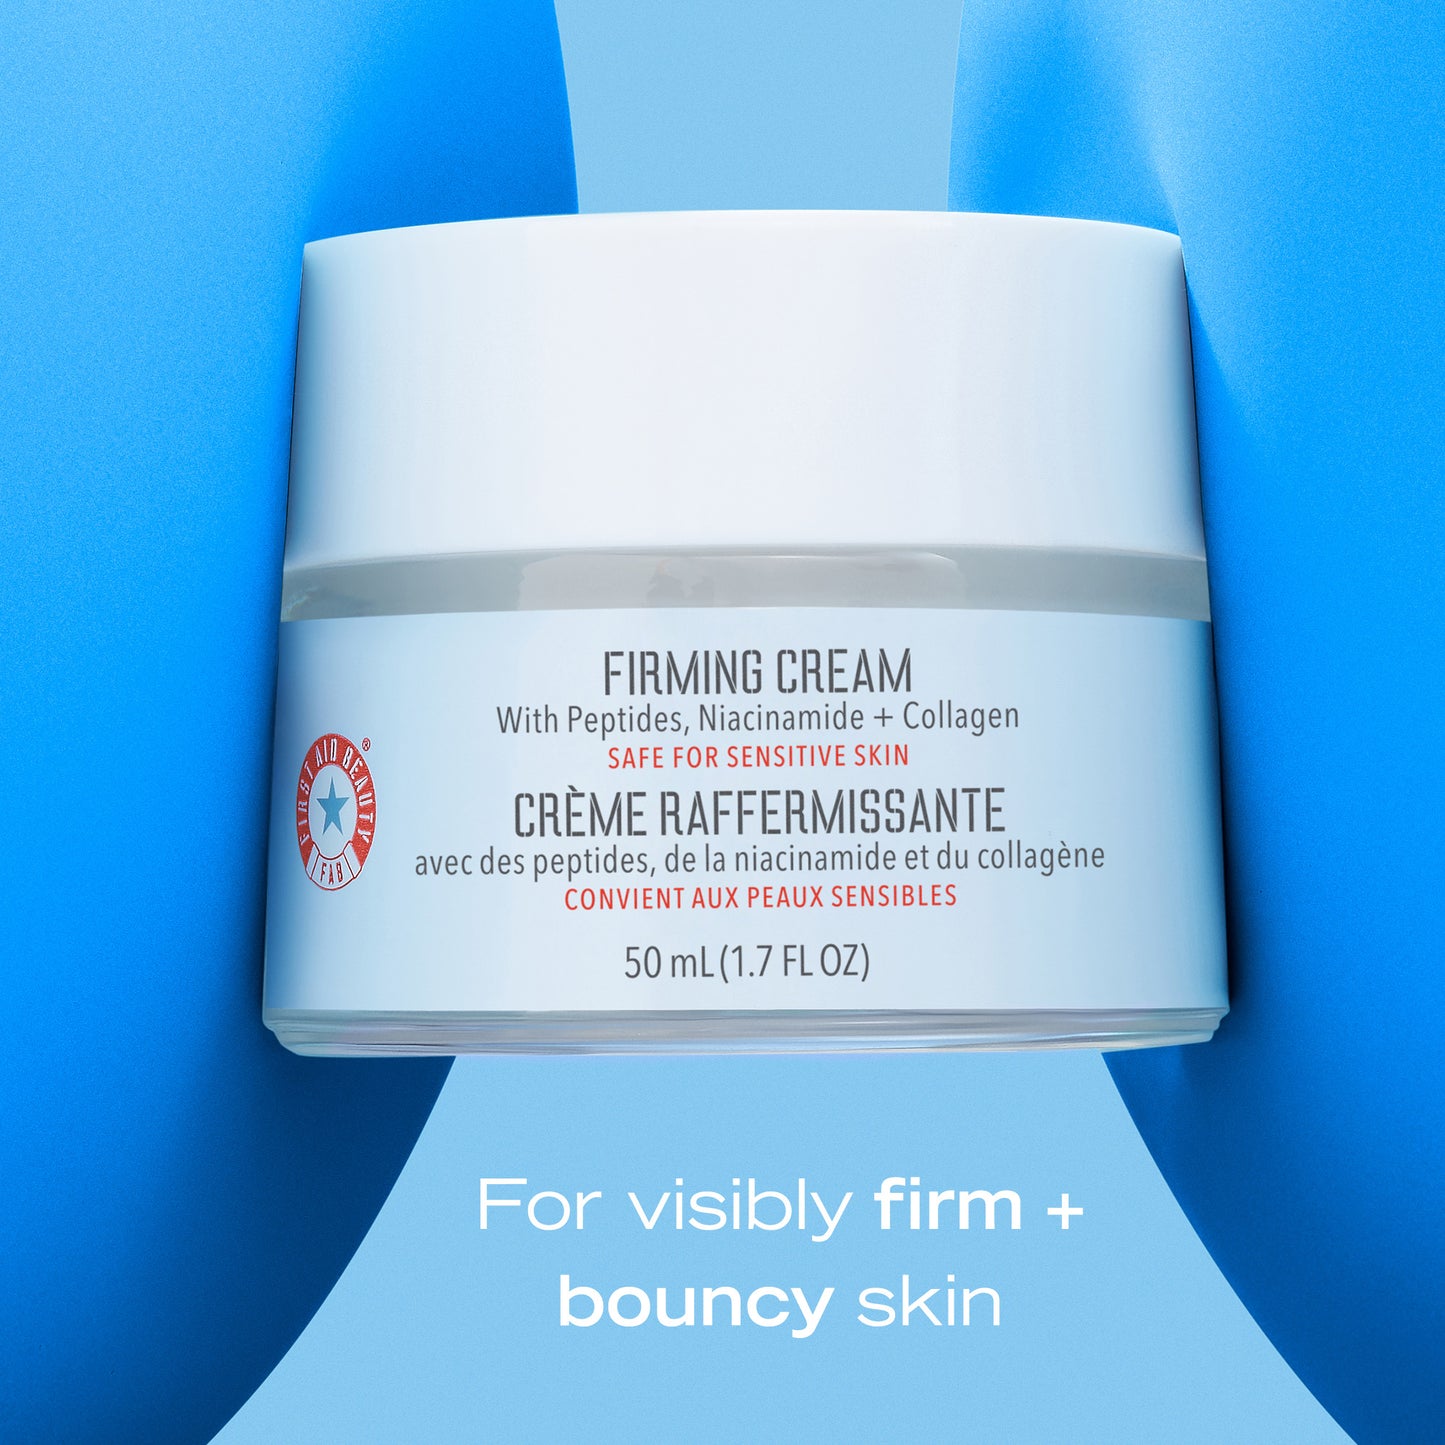 Firming Cream with Peptides, Niacinamide + Collagen. For visibly firm + bouncy skin.